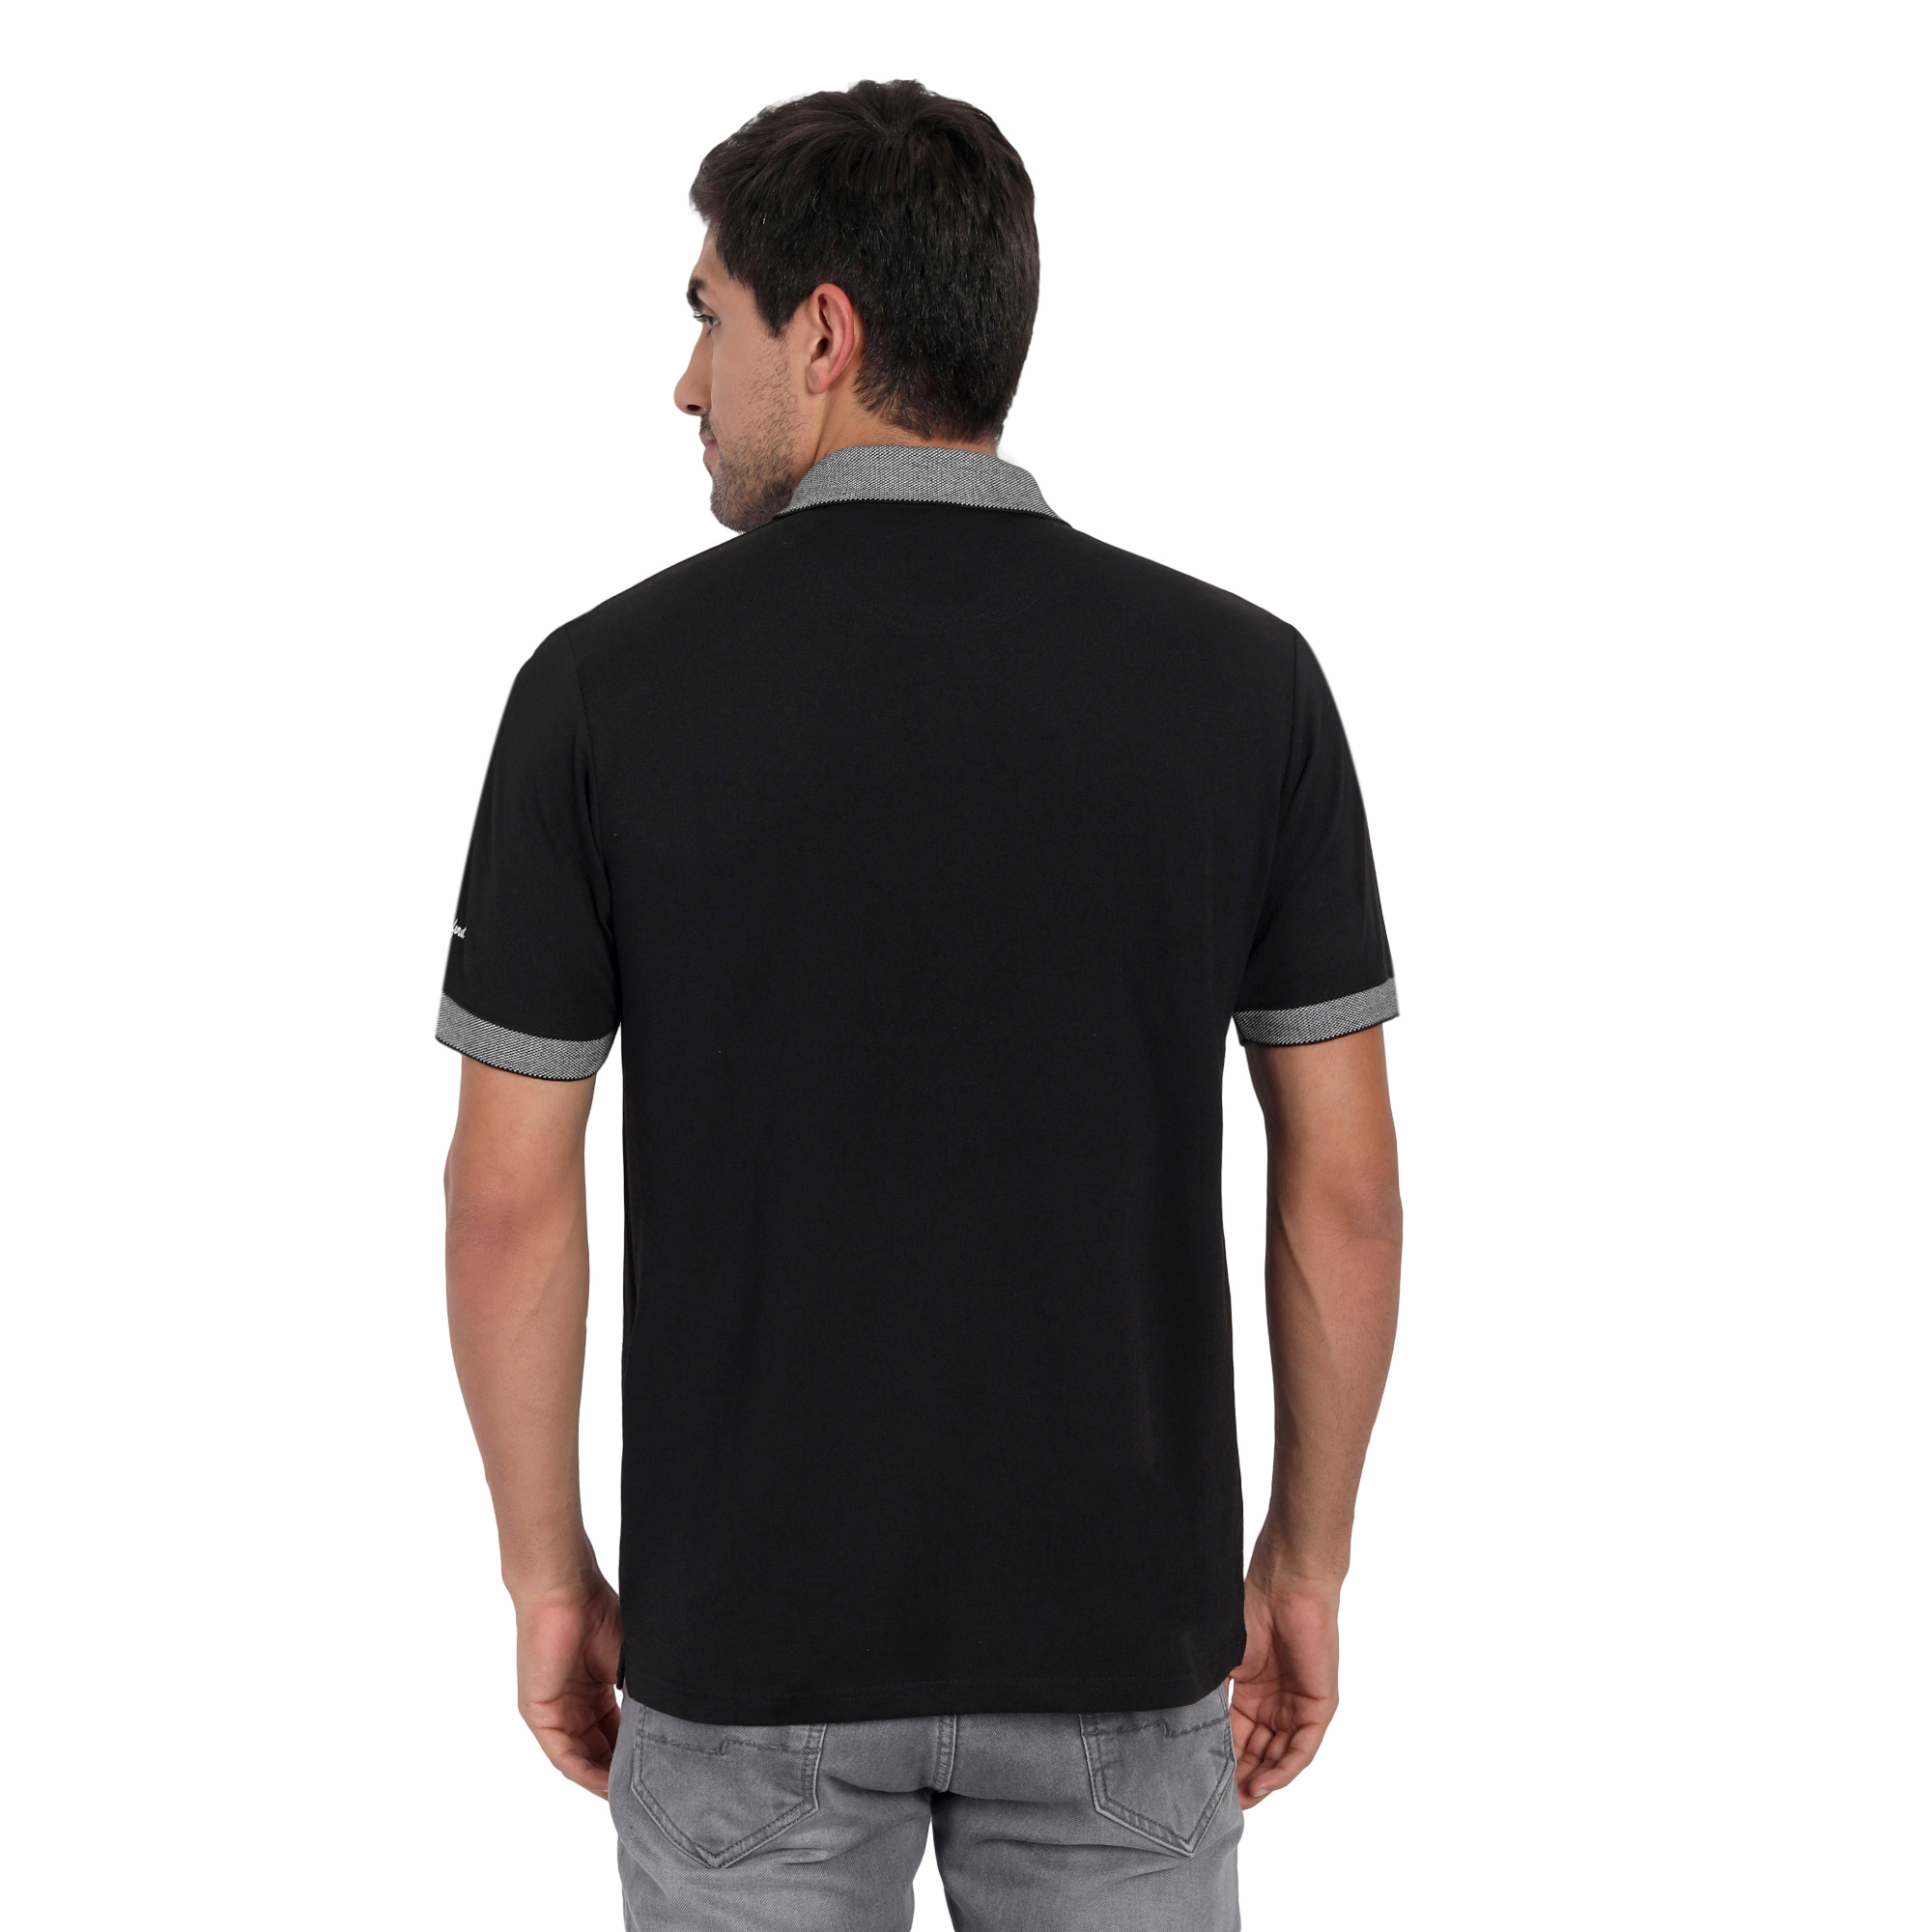 JCB Black Polo with Grey Collar T-Shirt – Welcome to the JCB ...